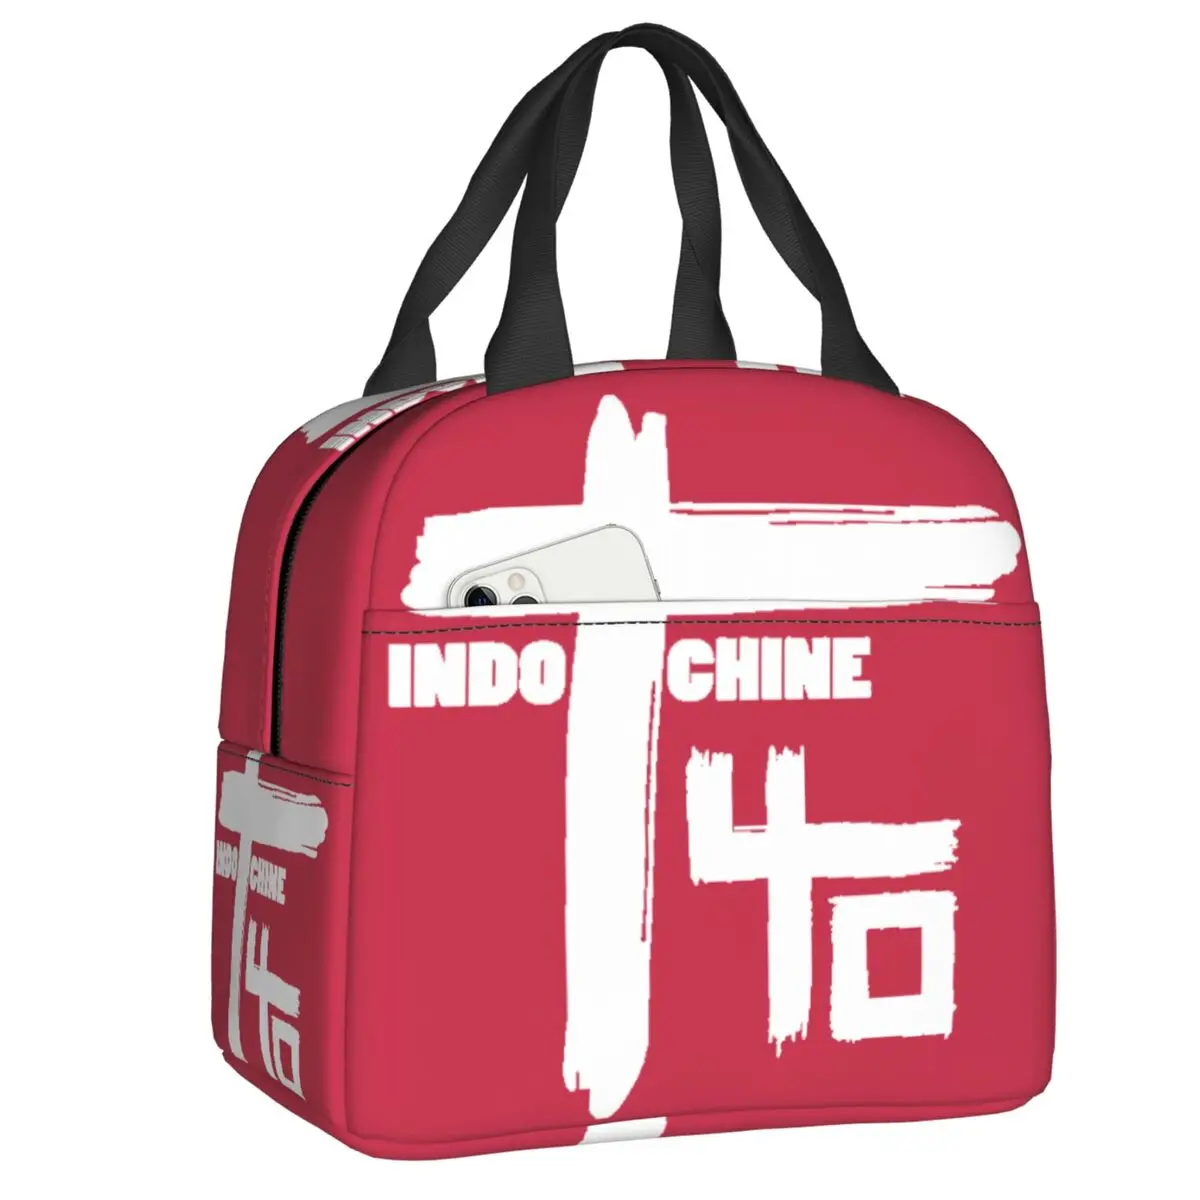 Indochine Insulated Lunch Tote Bag for Women Pop Rock And New Wave Resuable Thermal Cooler Food Lunch Box Kids School Children